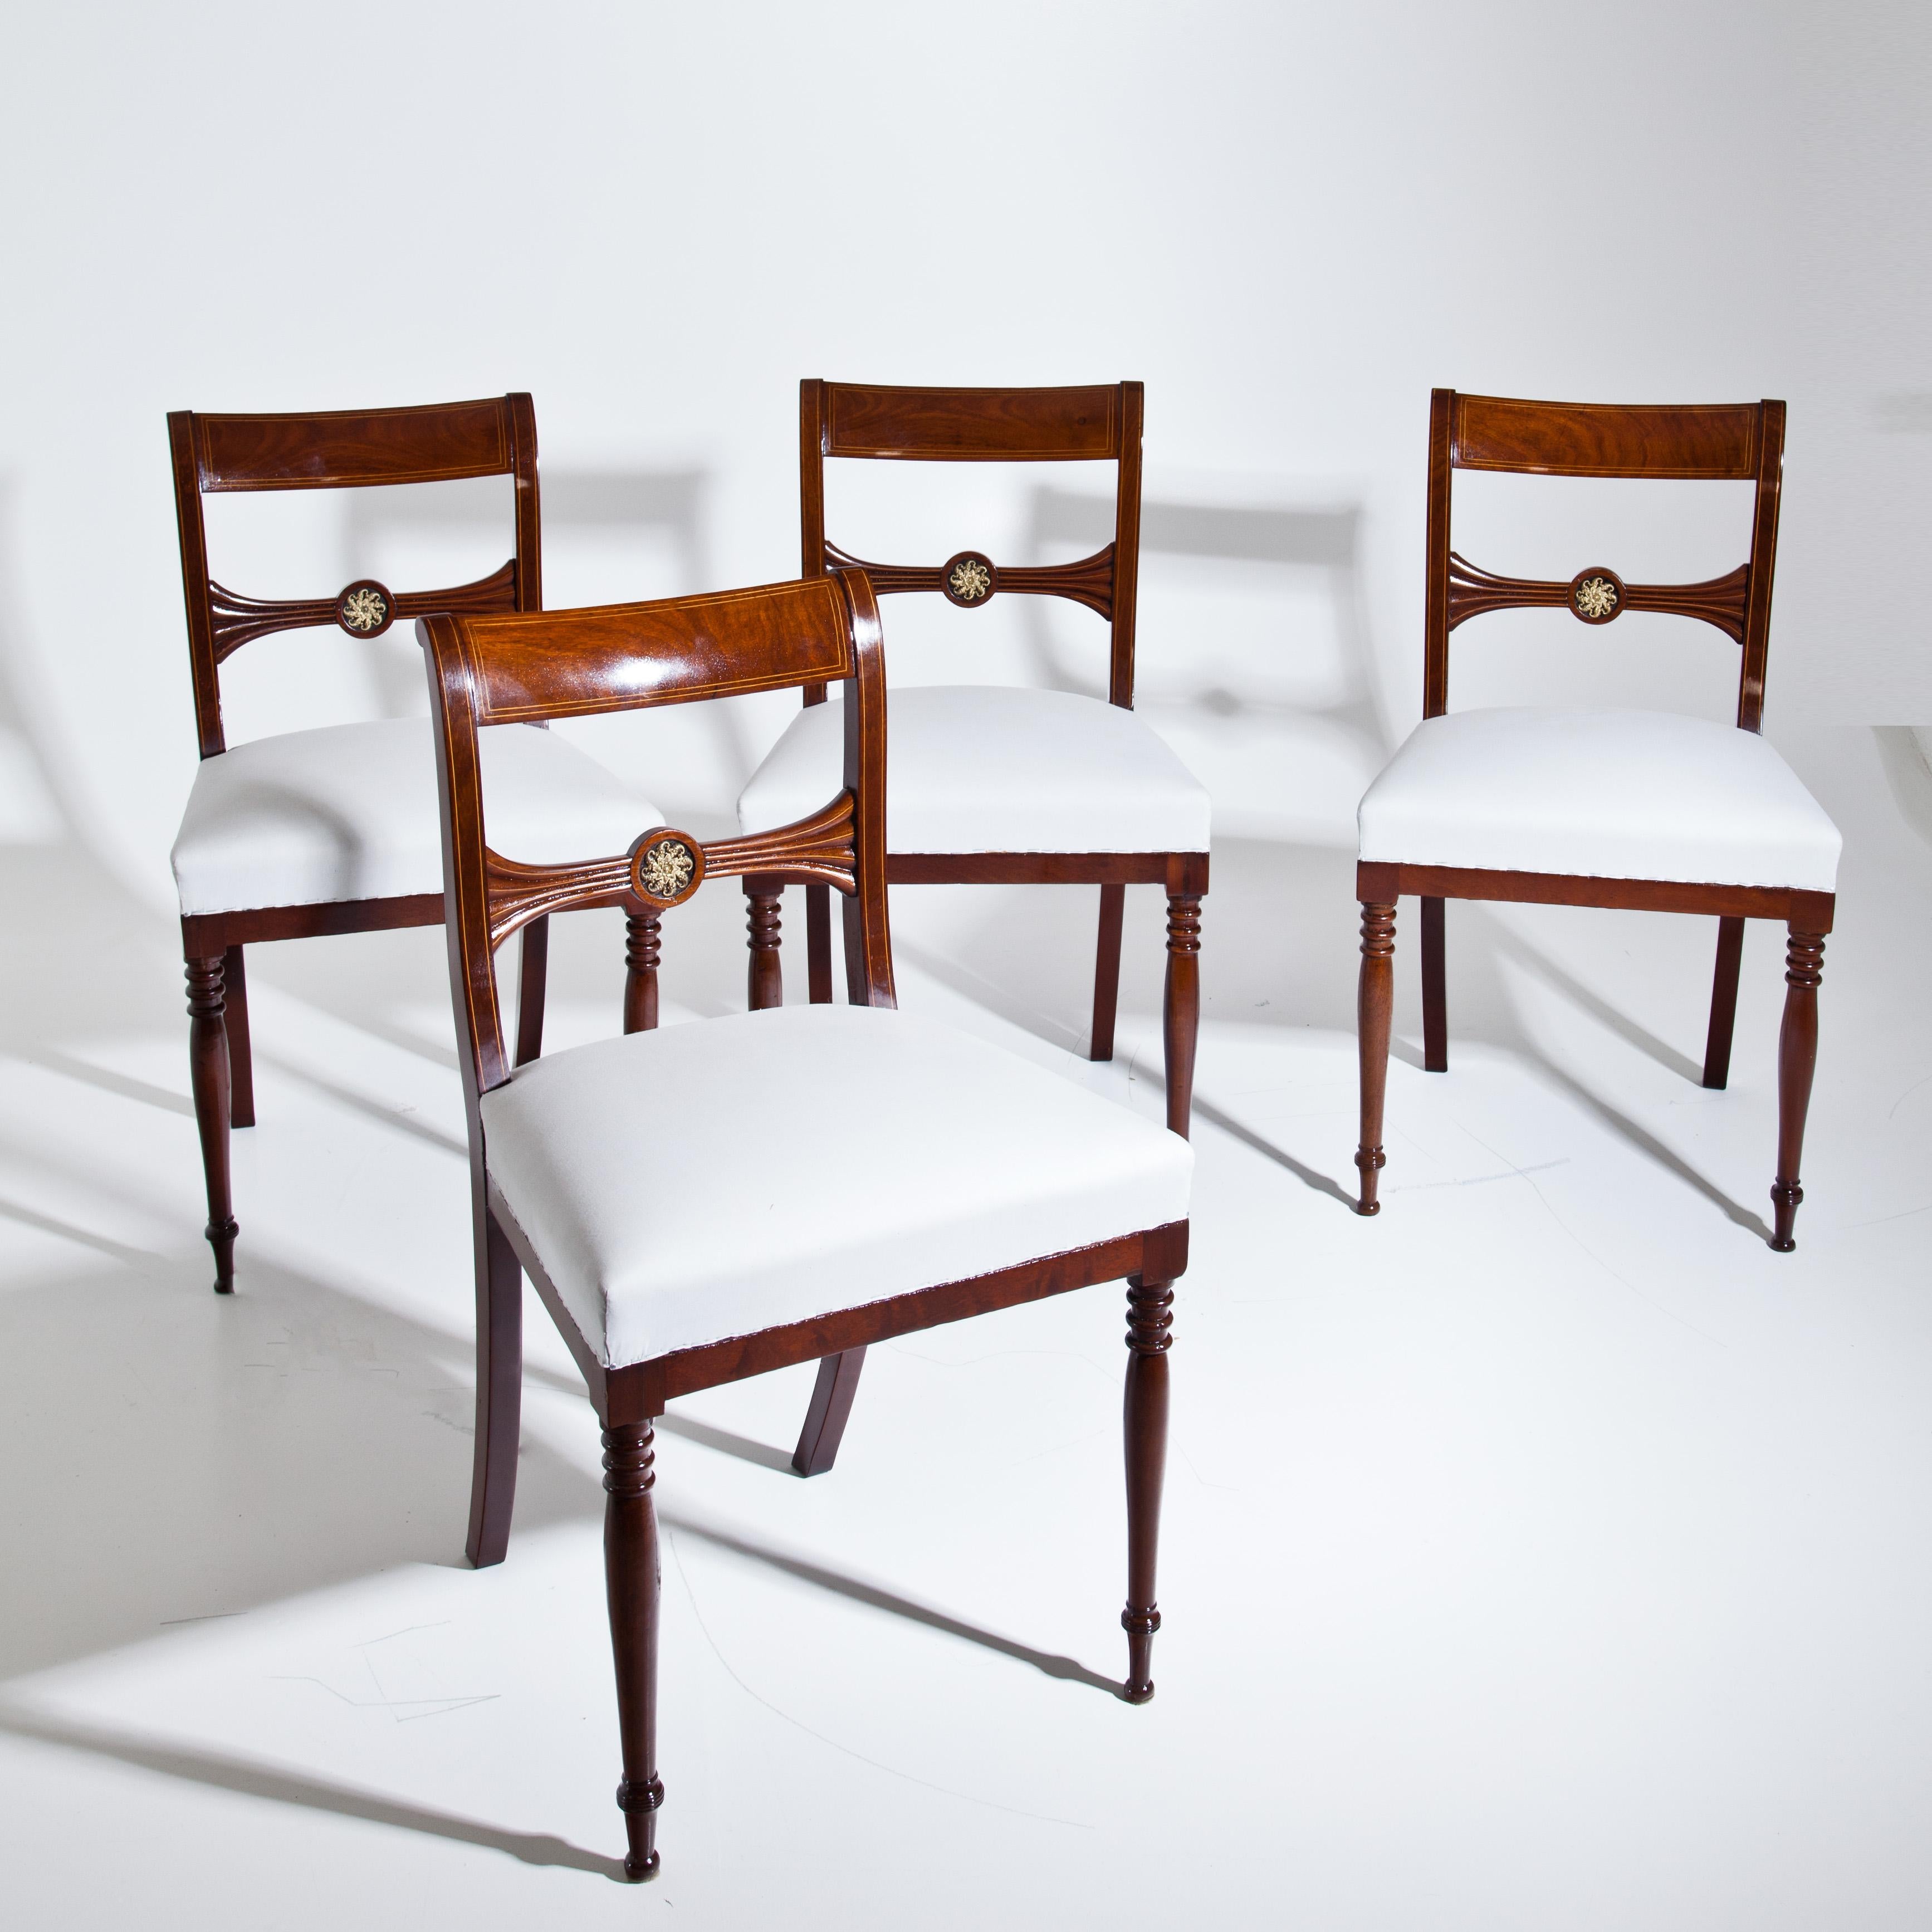 Set of four mahogany chairs with thread inalys and s-shaped backrests with gilt ornaments in the shape of cornucopias on the middle slat. The chairs stand on bent rear legs and baluster shaped front legs. The chairs are in a restored condition and